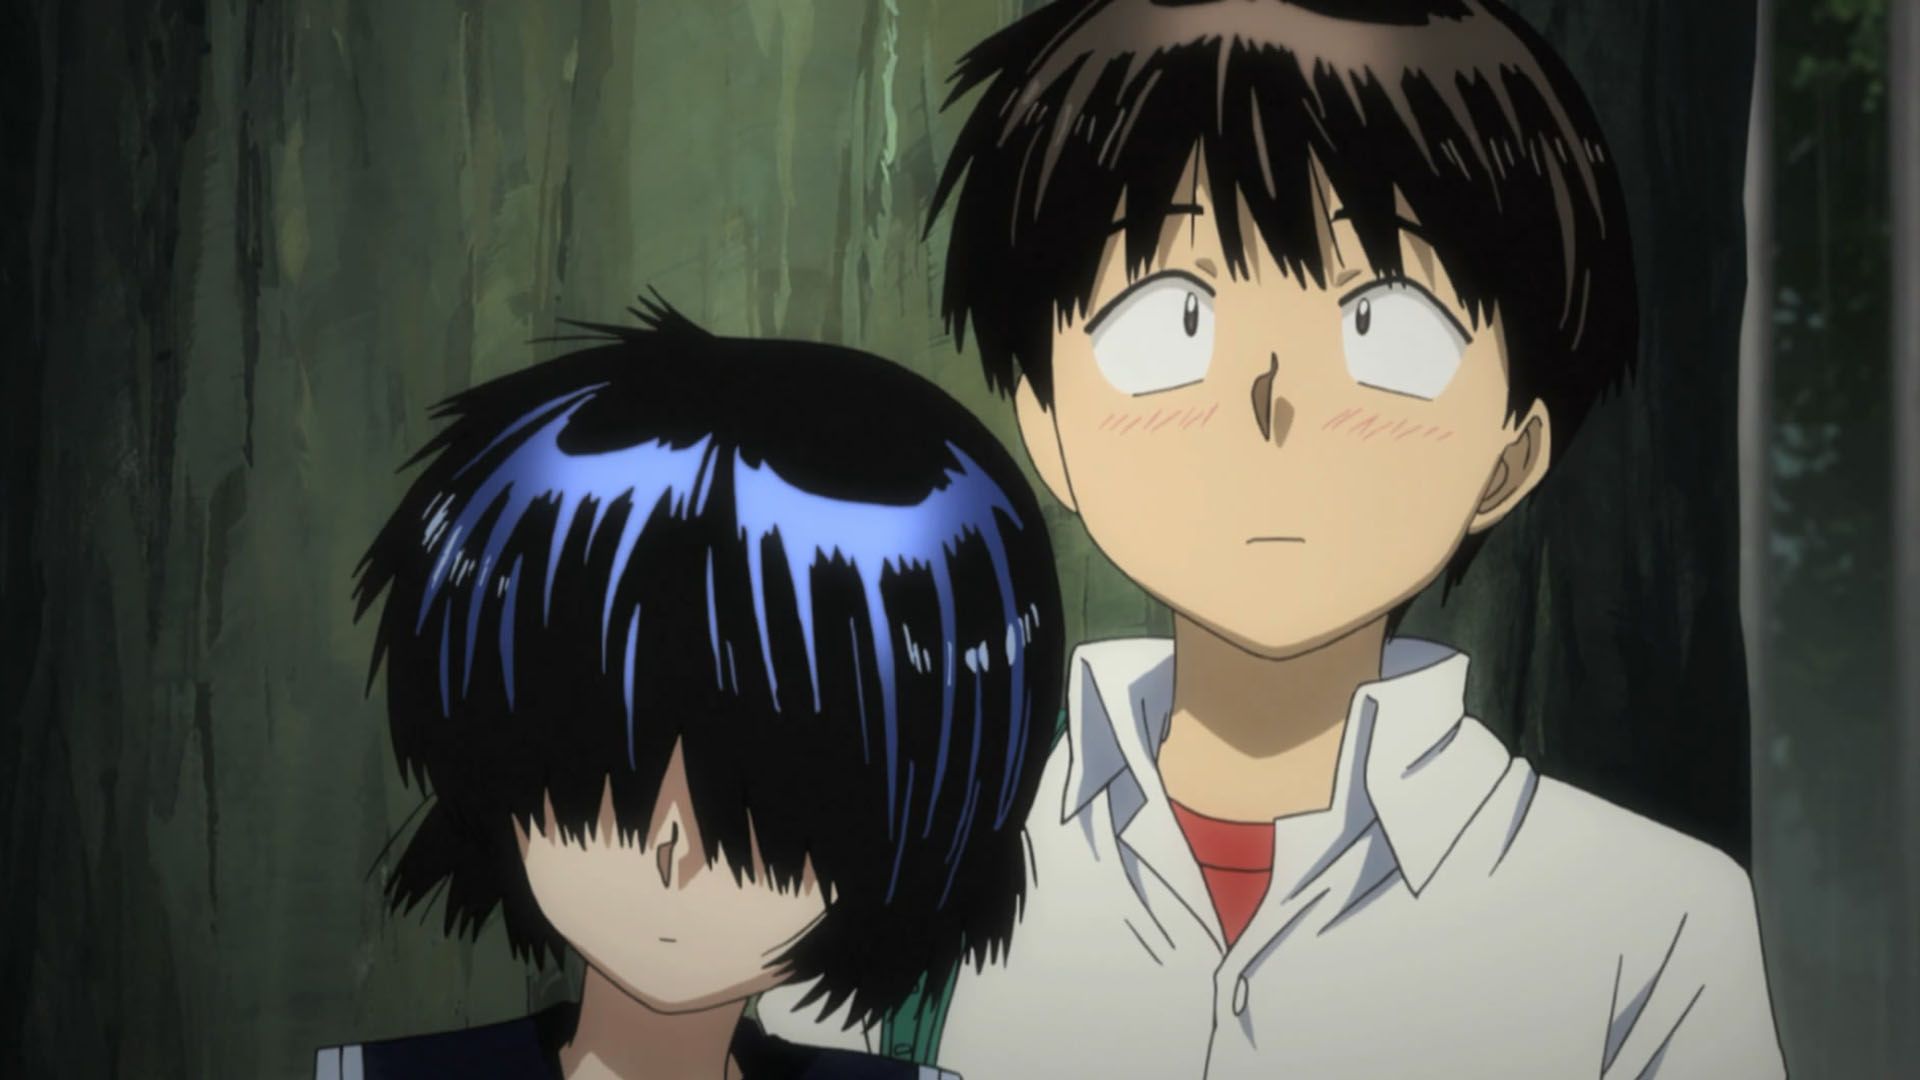 Mysterious Girlfriend X - Other & Anime Background Wallpapers on Desktop  Nexus (Image 802795)